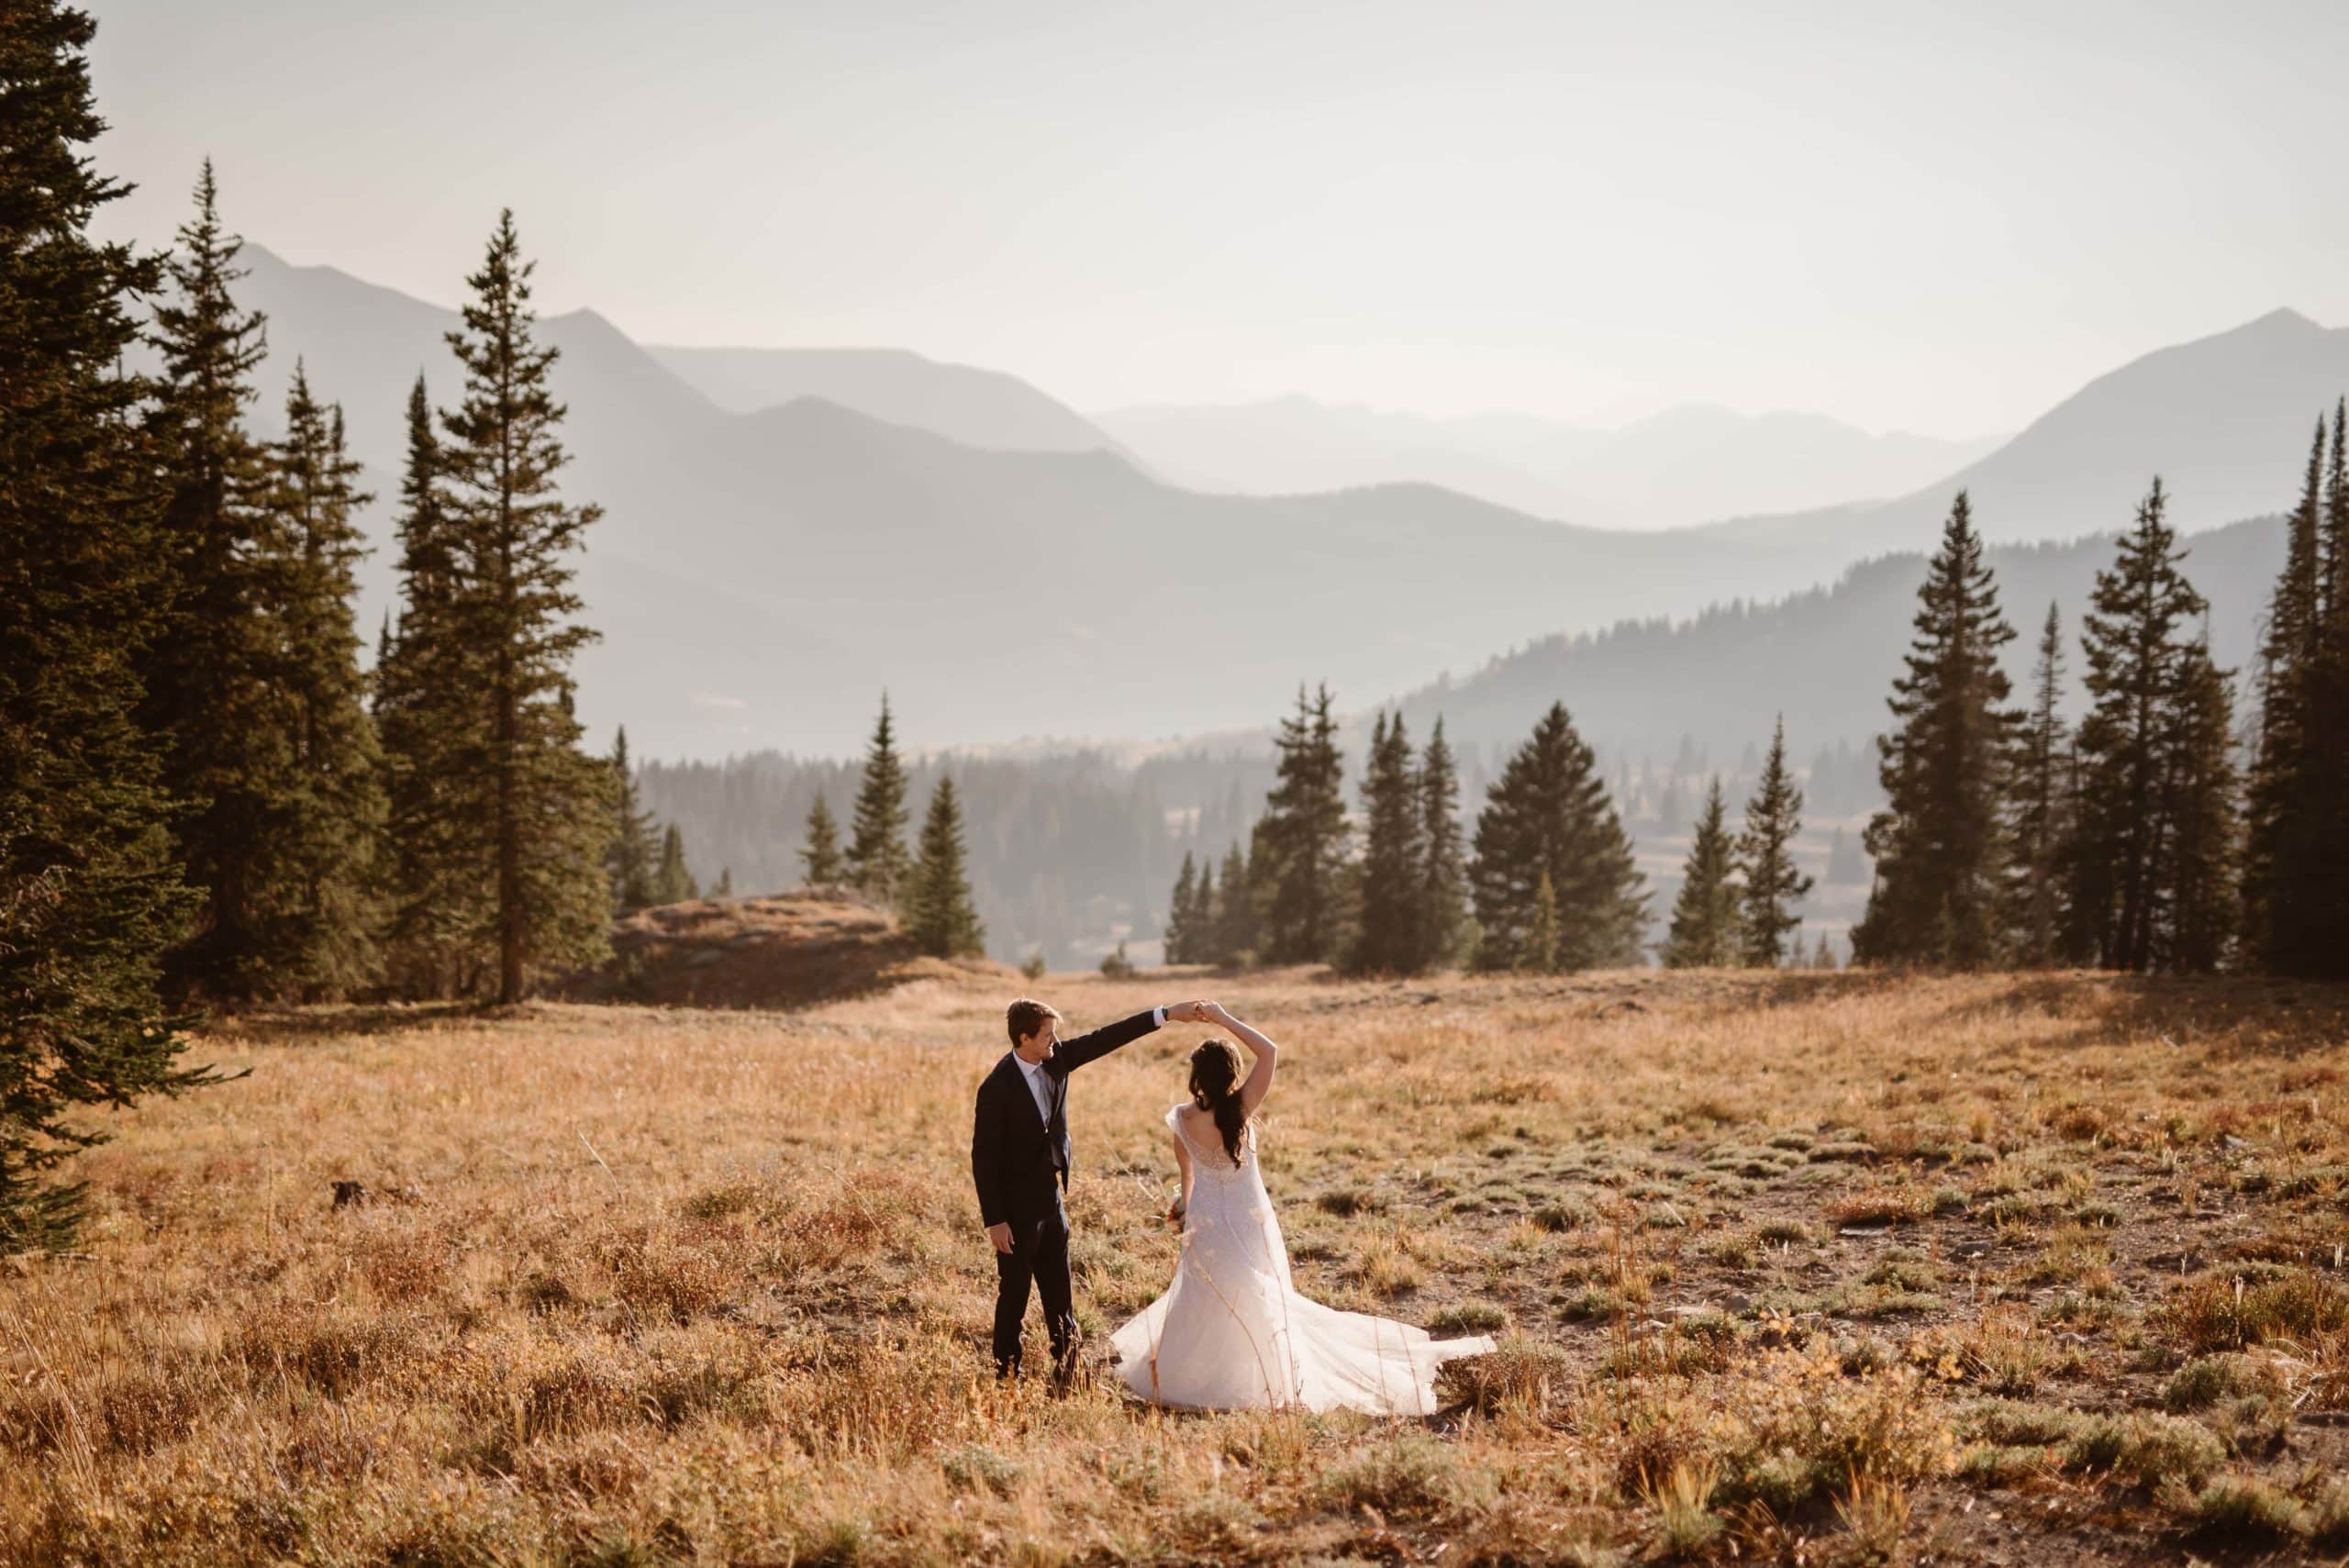 Groom twirls bride in a meadow in Crested Butte, Colorado. There are forests and mountains in the background.